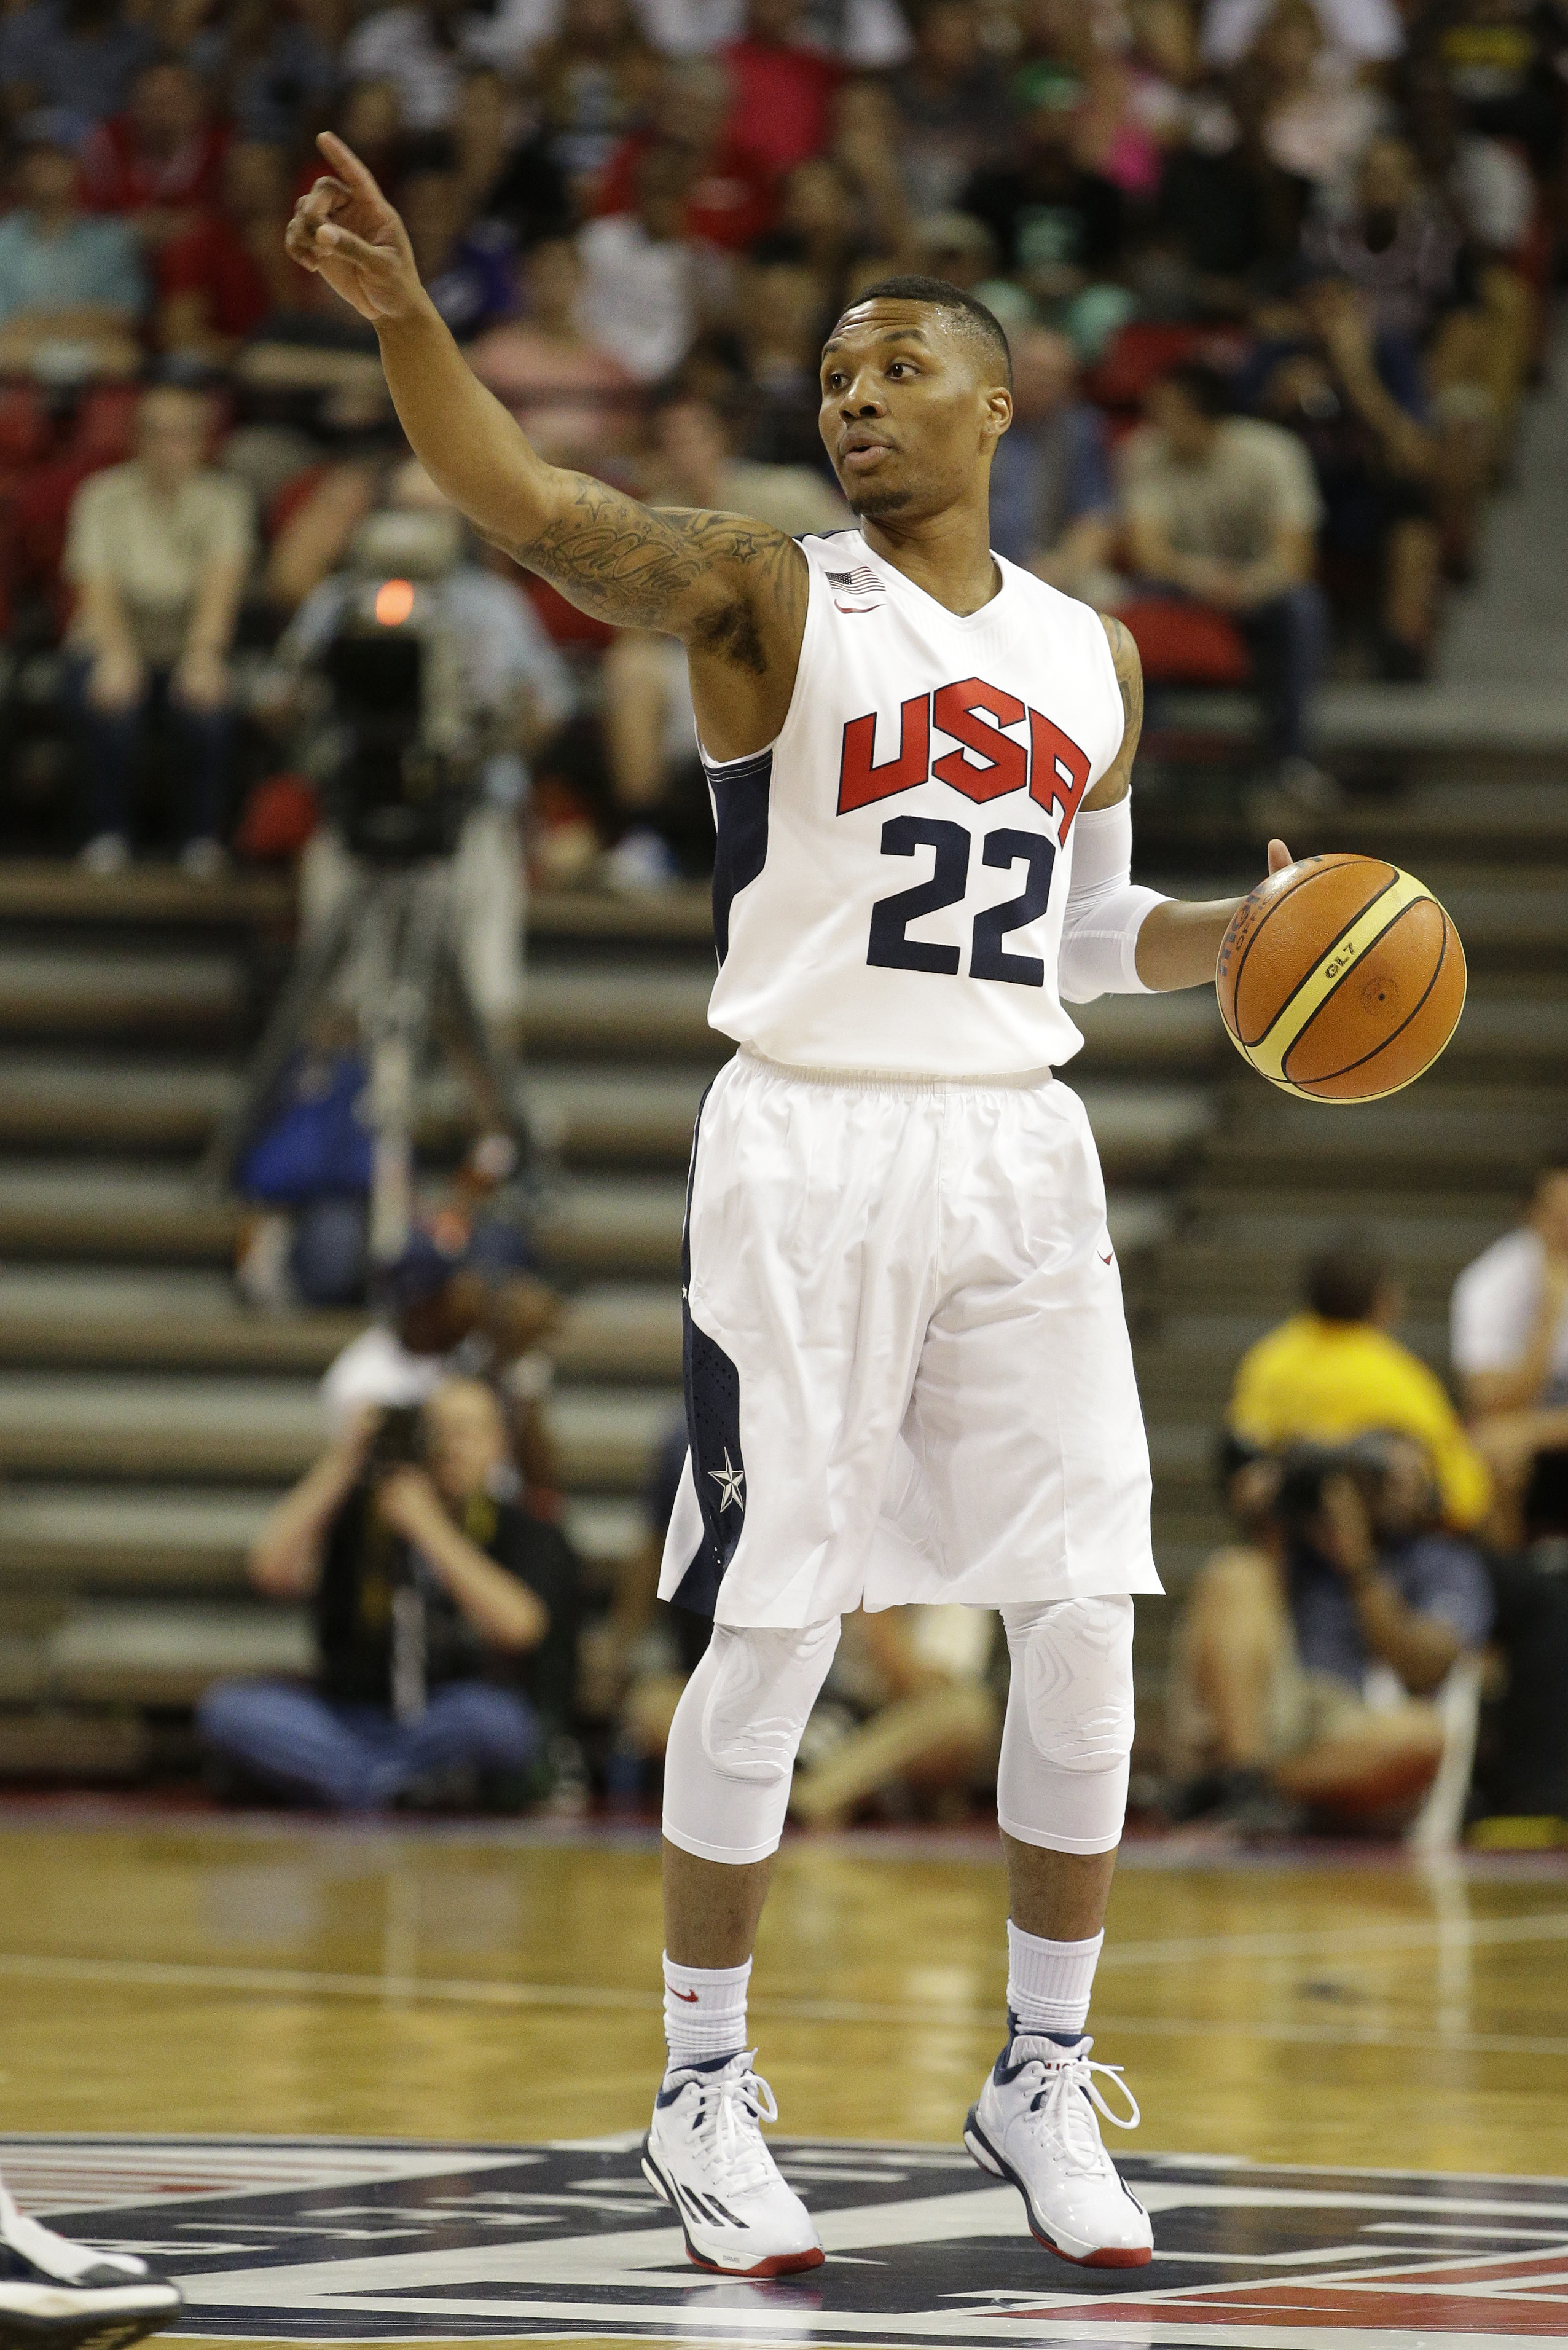 Haynes: Damian Lillard First Alternate For USA If Derrick Rose, Other Player Opt Out ...